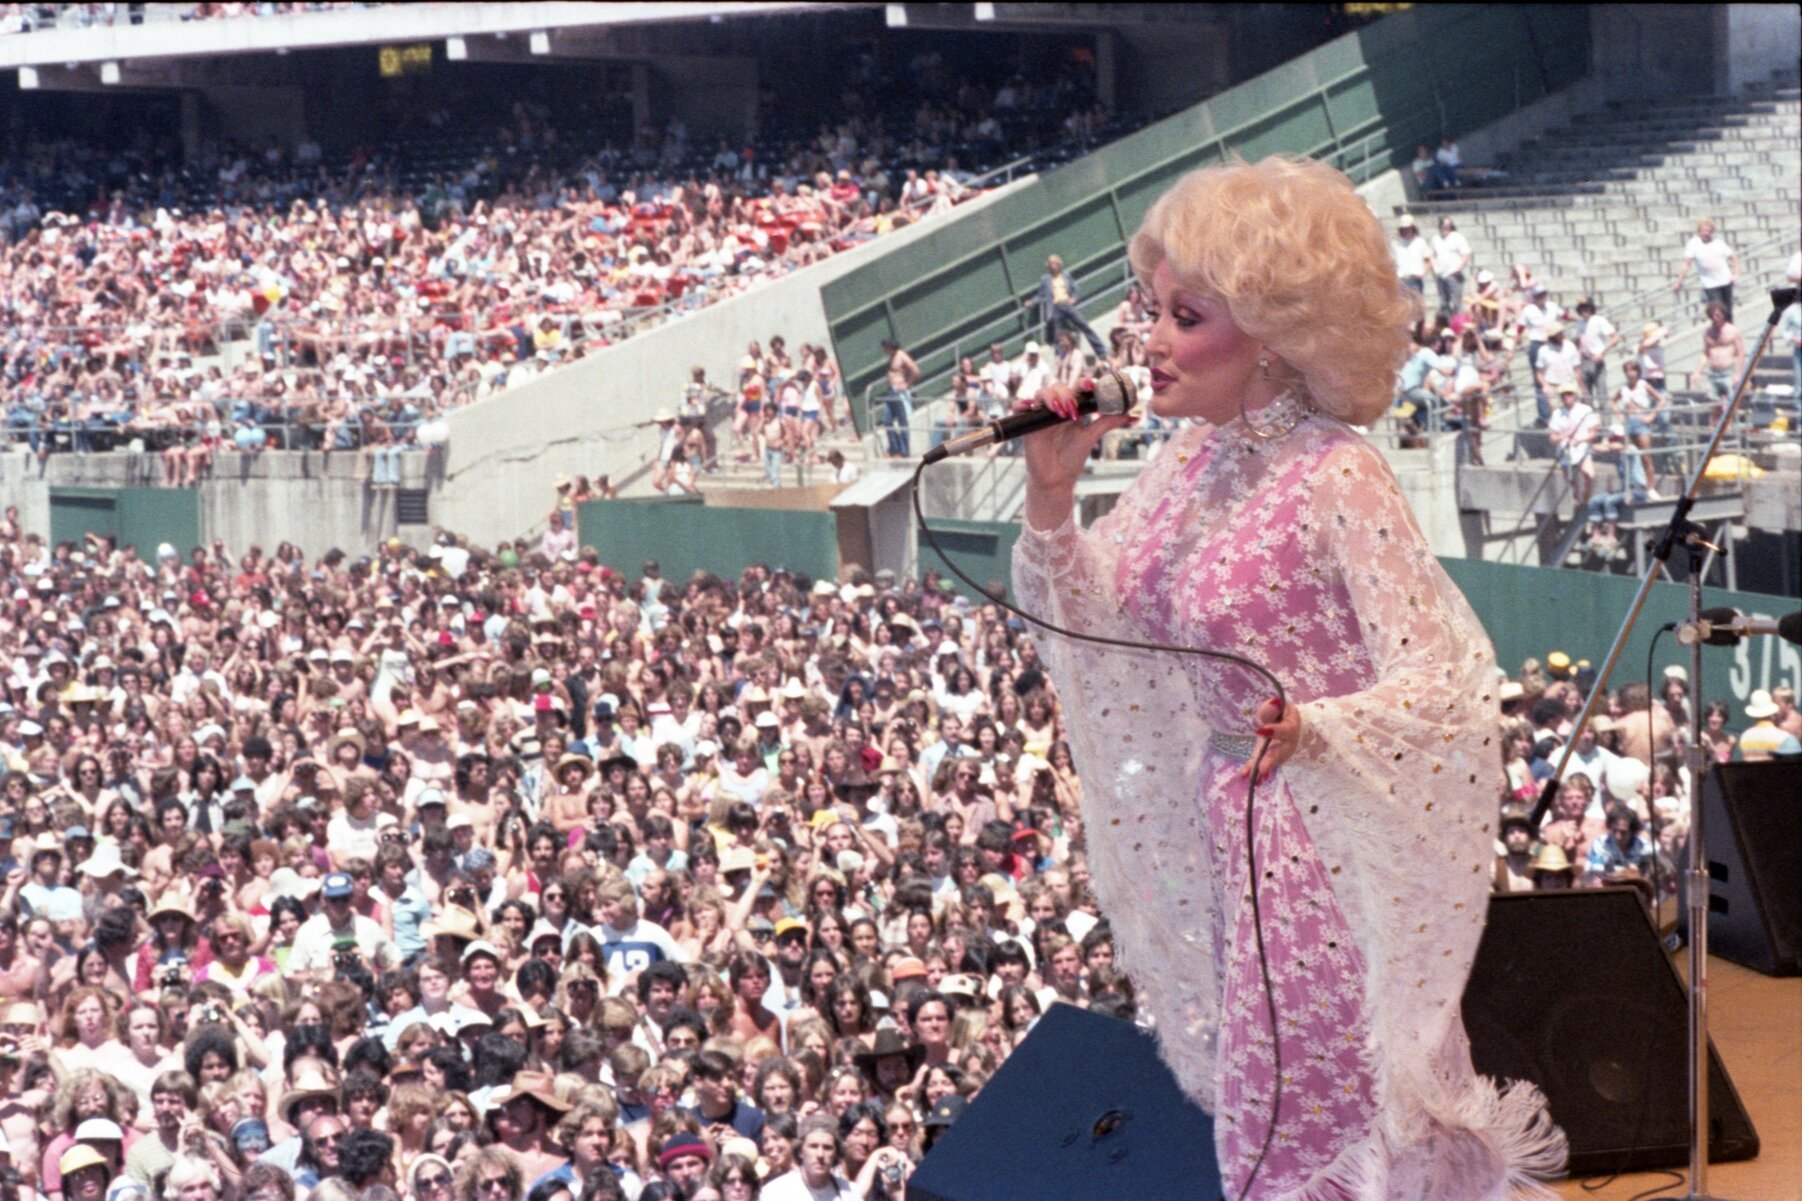 Dolly Parton performing onstage at Day on the Green concert at Oakland Coliseum on May 28, 1978 in Oakland, California.